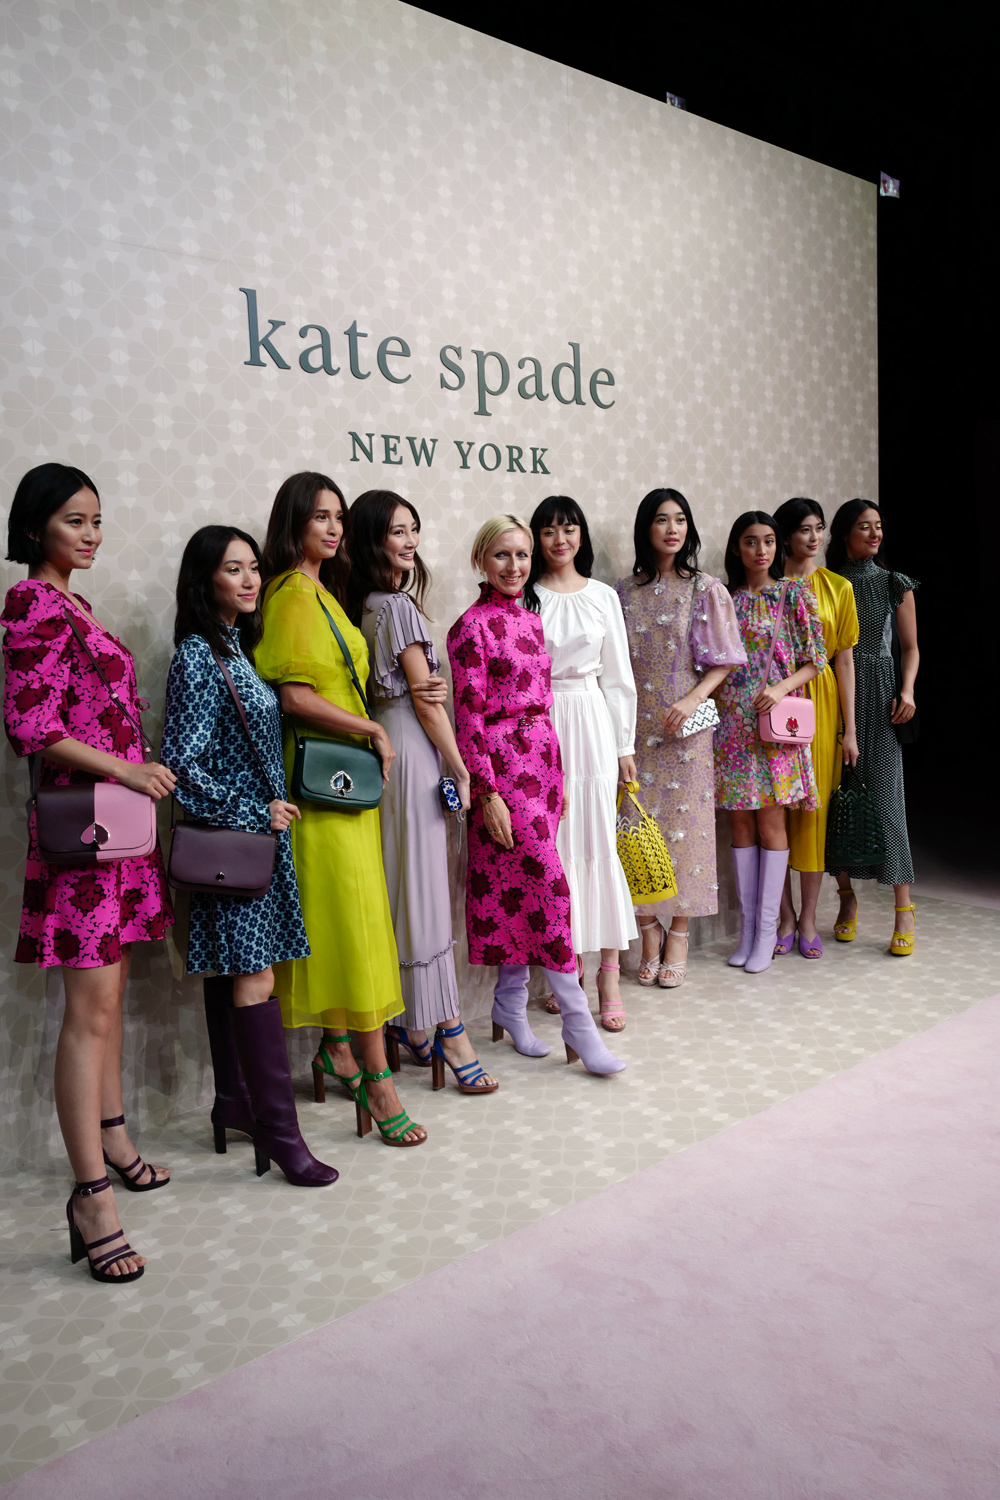 The Kate Spade New York Spring 2019 Collection